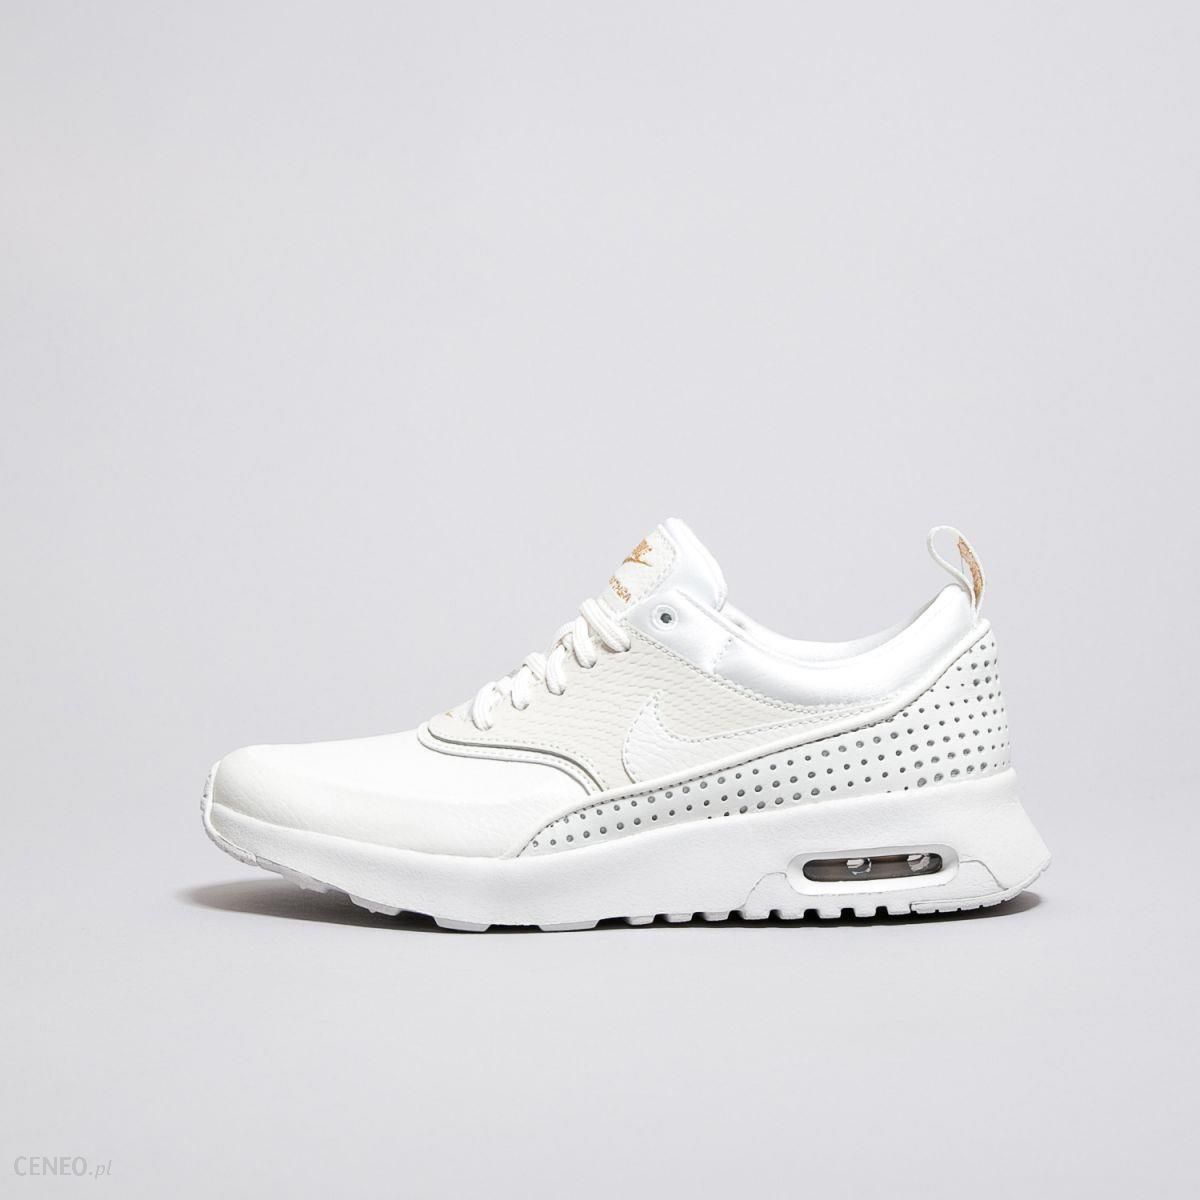 AIR MAX THEA PREMIUM AA1440-100 Ceny i opinie -